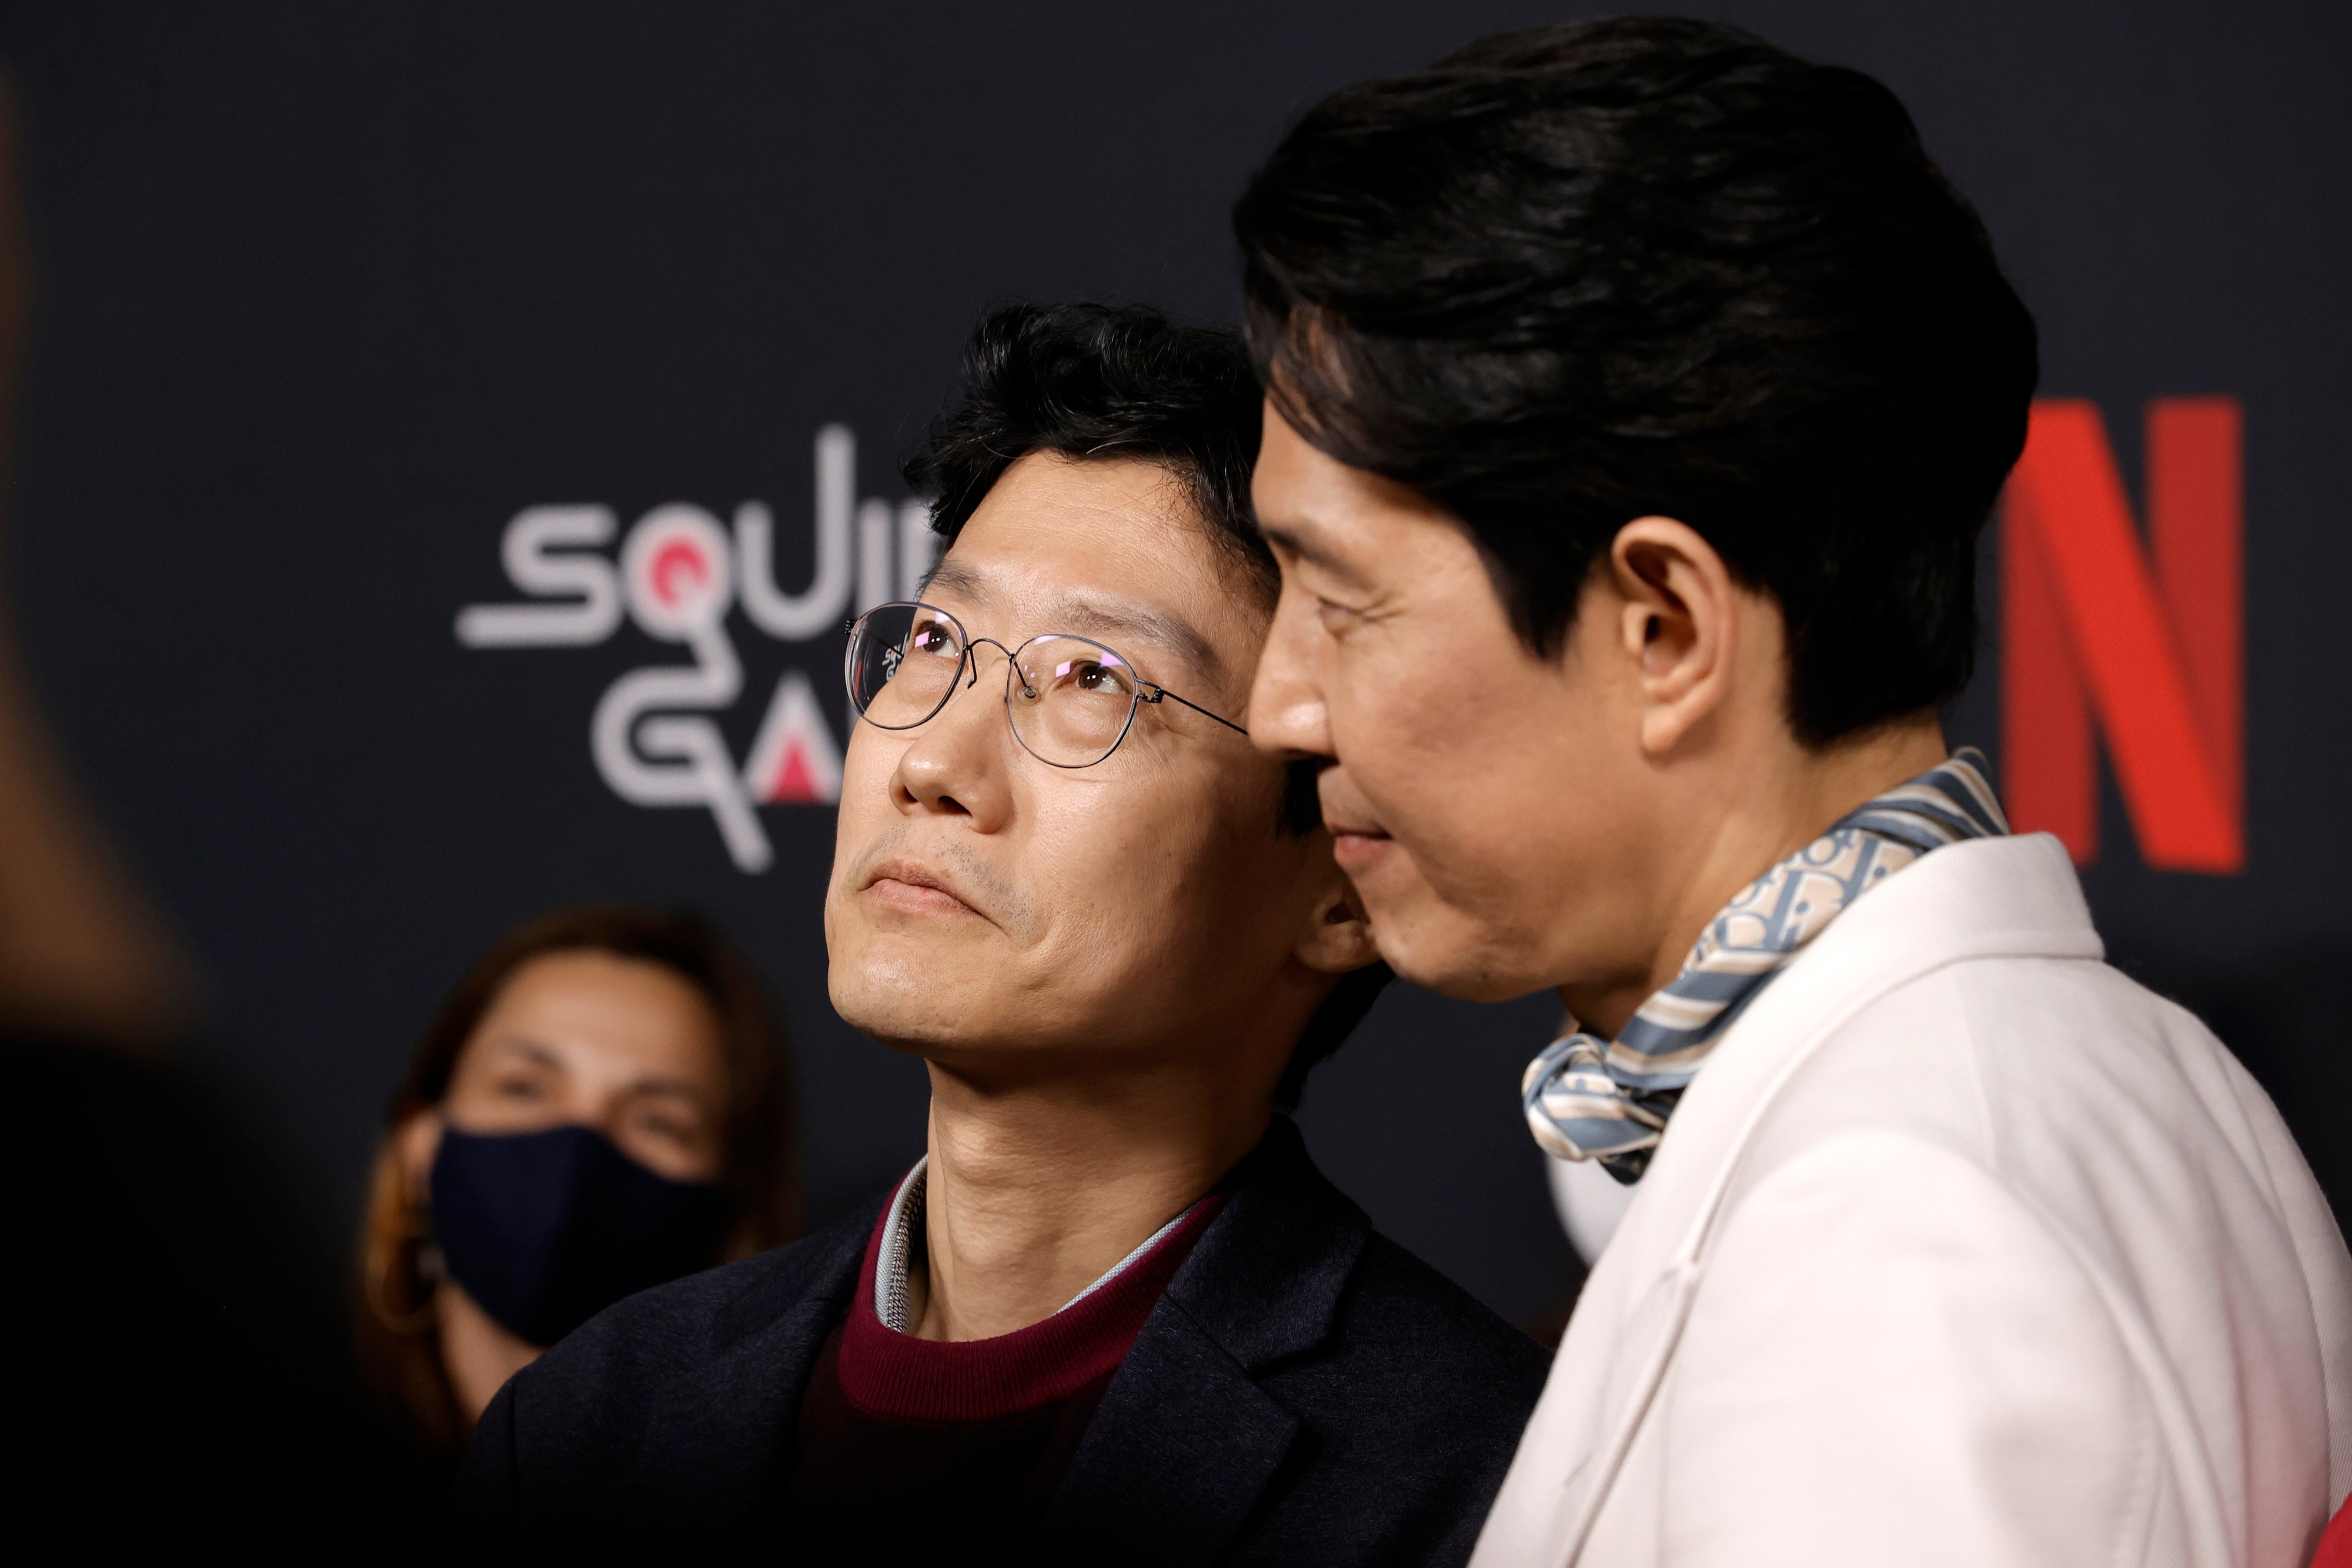 Hwang Dong-hyuk and Lee Jung-jae for 'Squid Game' at red carpet premiere.